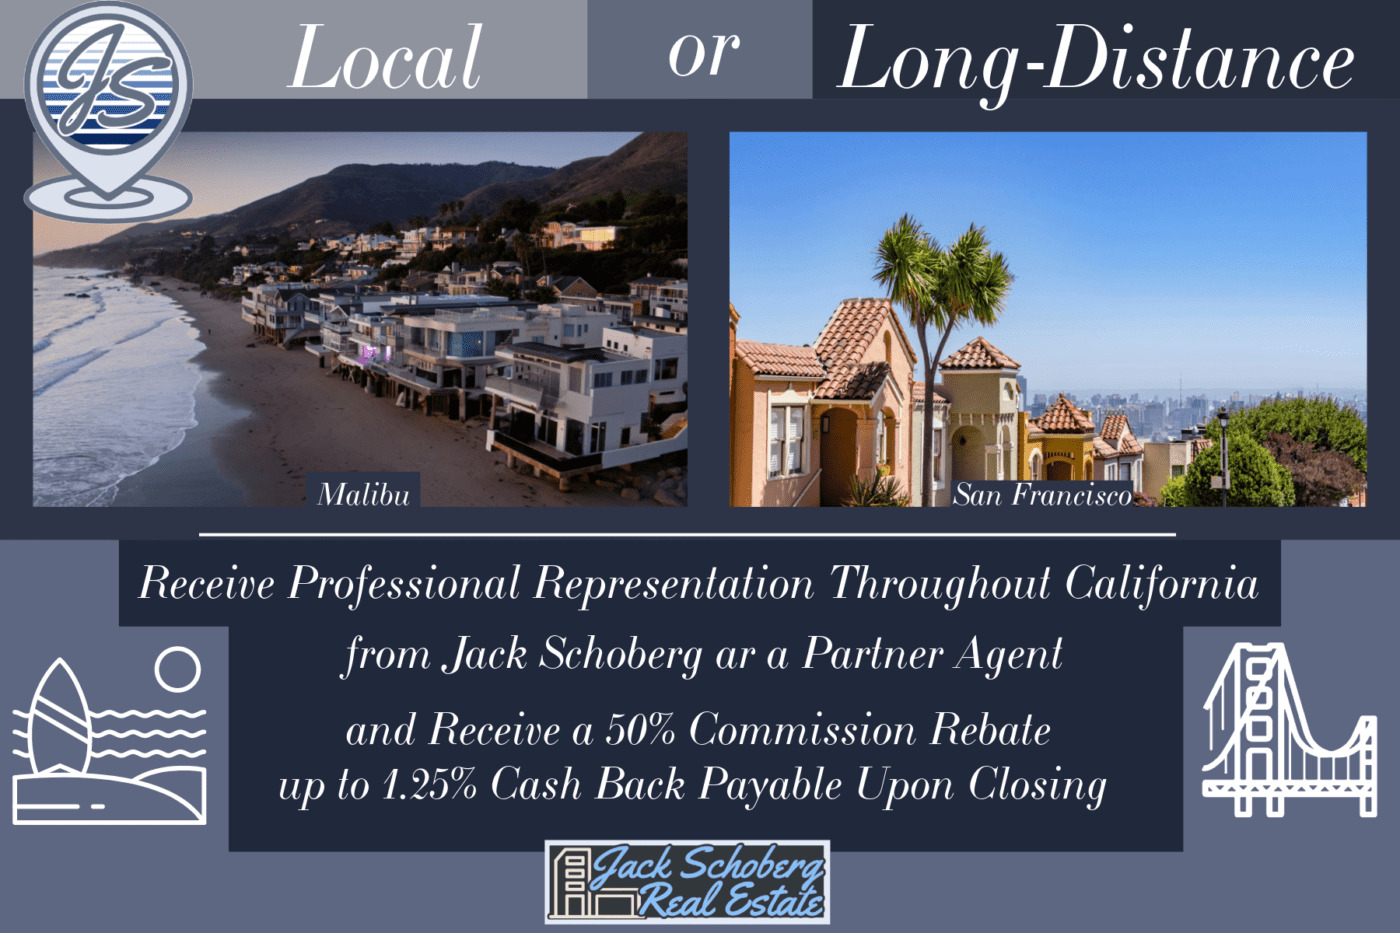 CALIFORNIA BUYERS IN ALL LOCATIONS CAN BENEFIT FROM JACK SCHOBERG'S REPRESENTATION